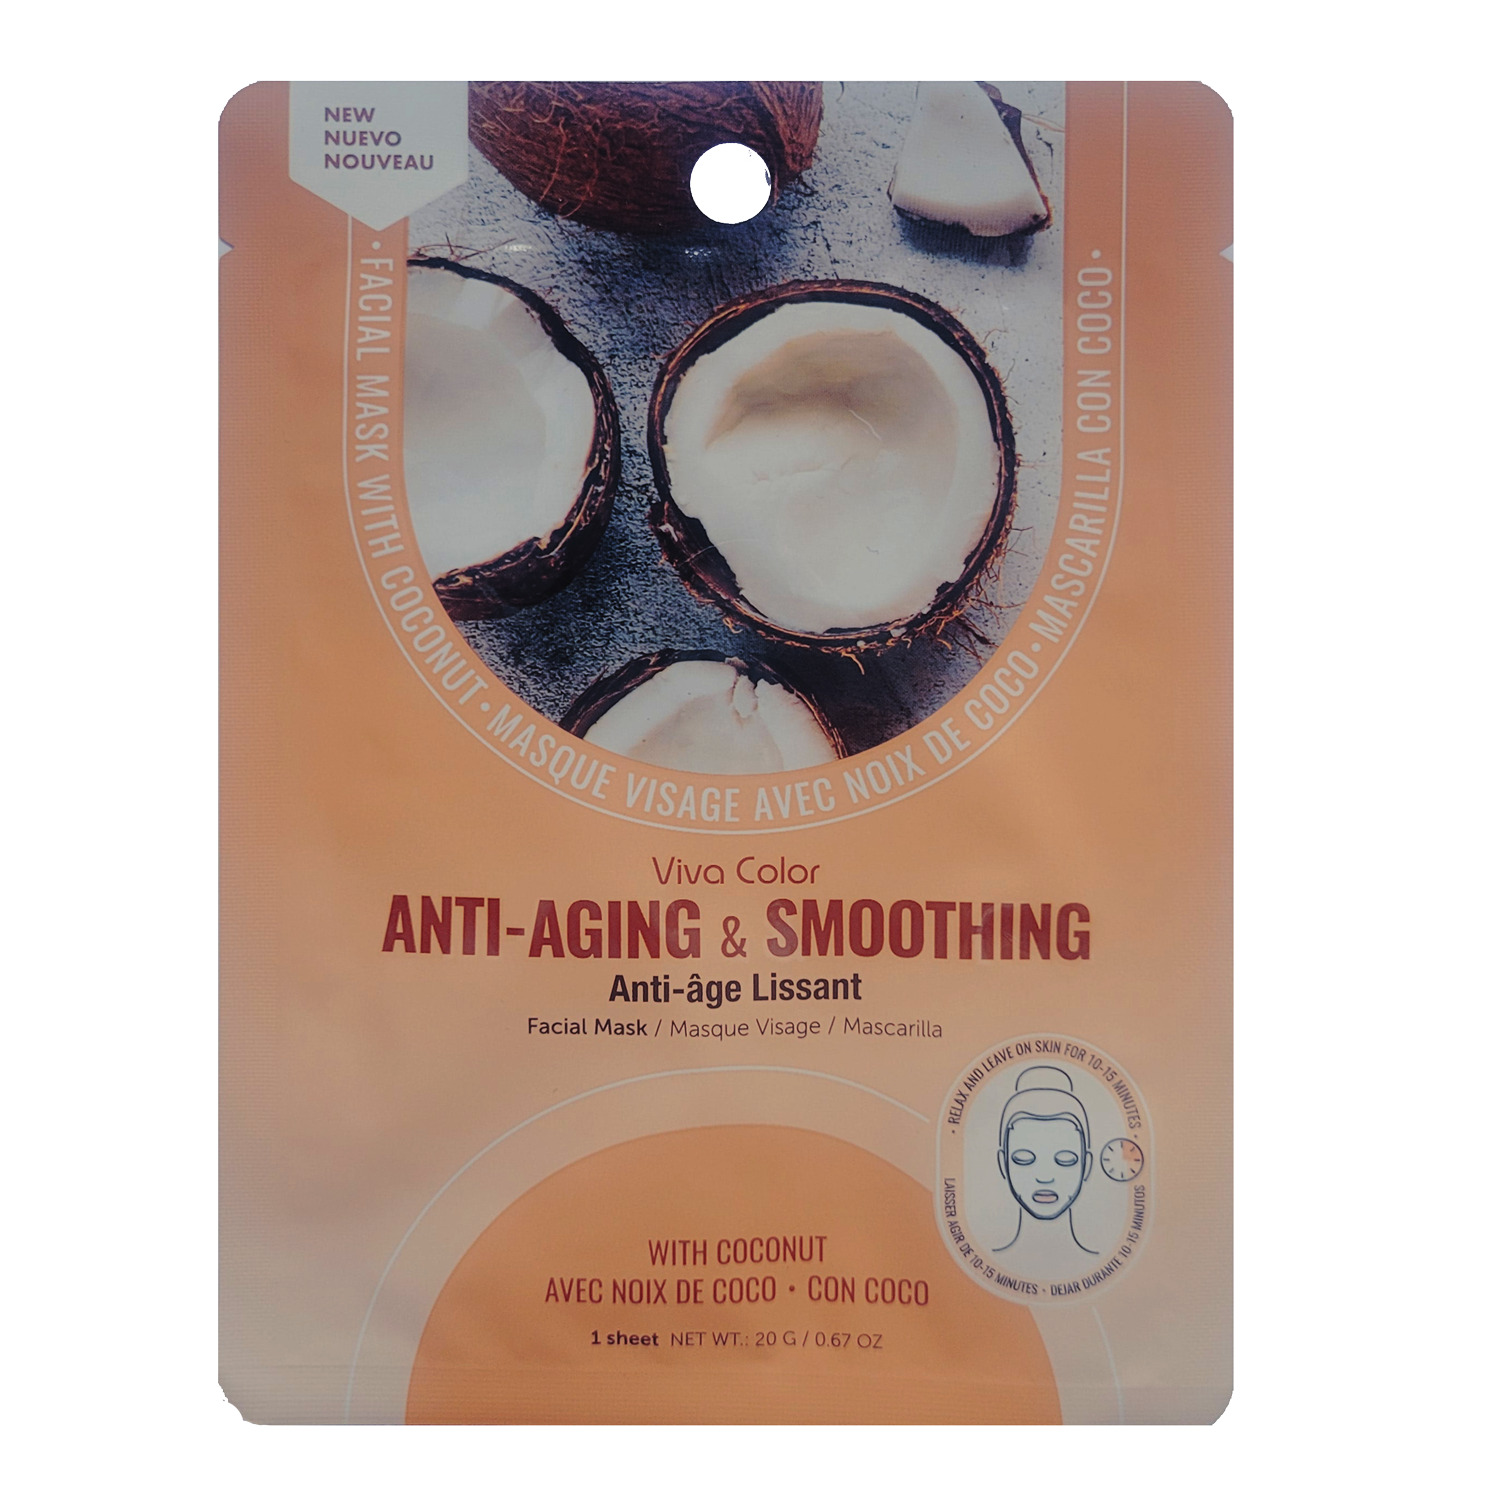 Viva Color - Anti-aging and smoothing facial mask, coconut